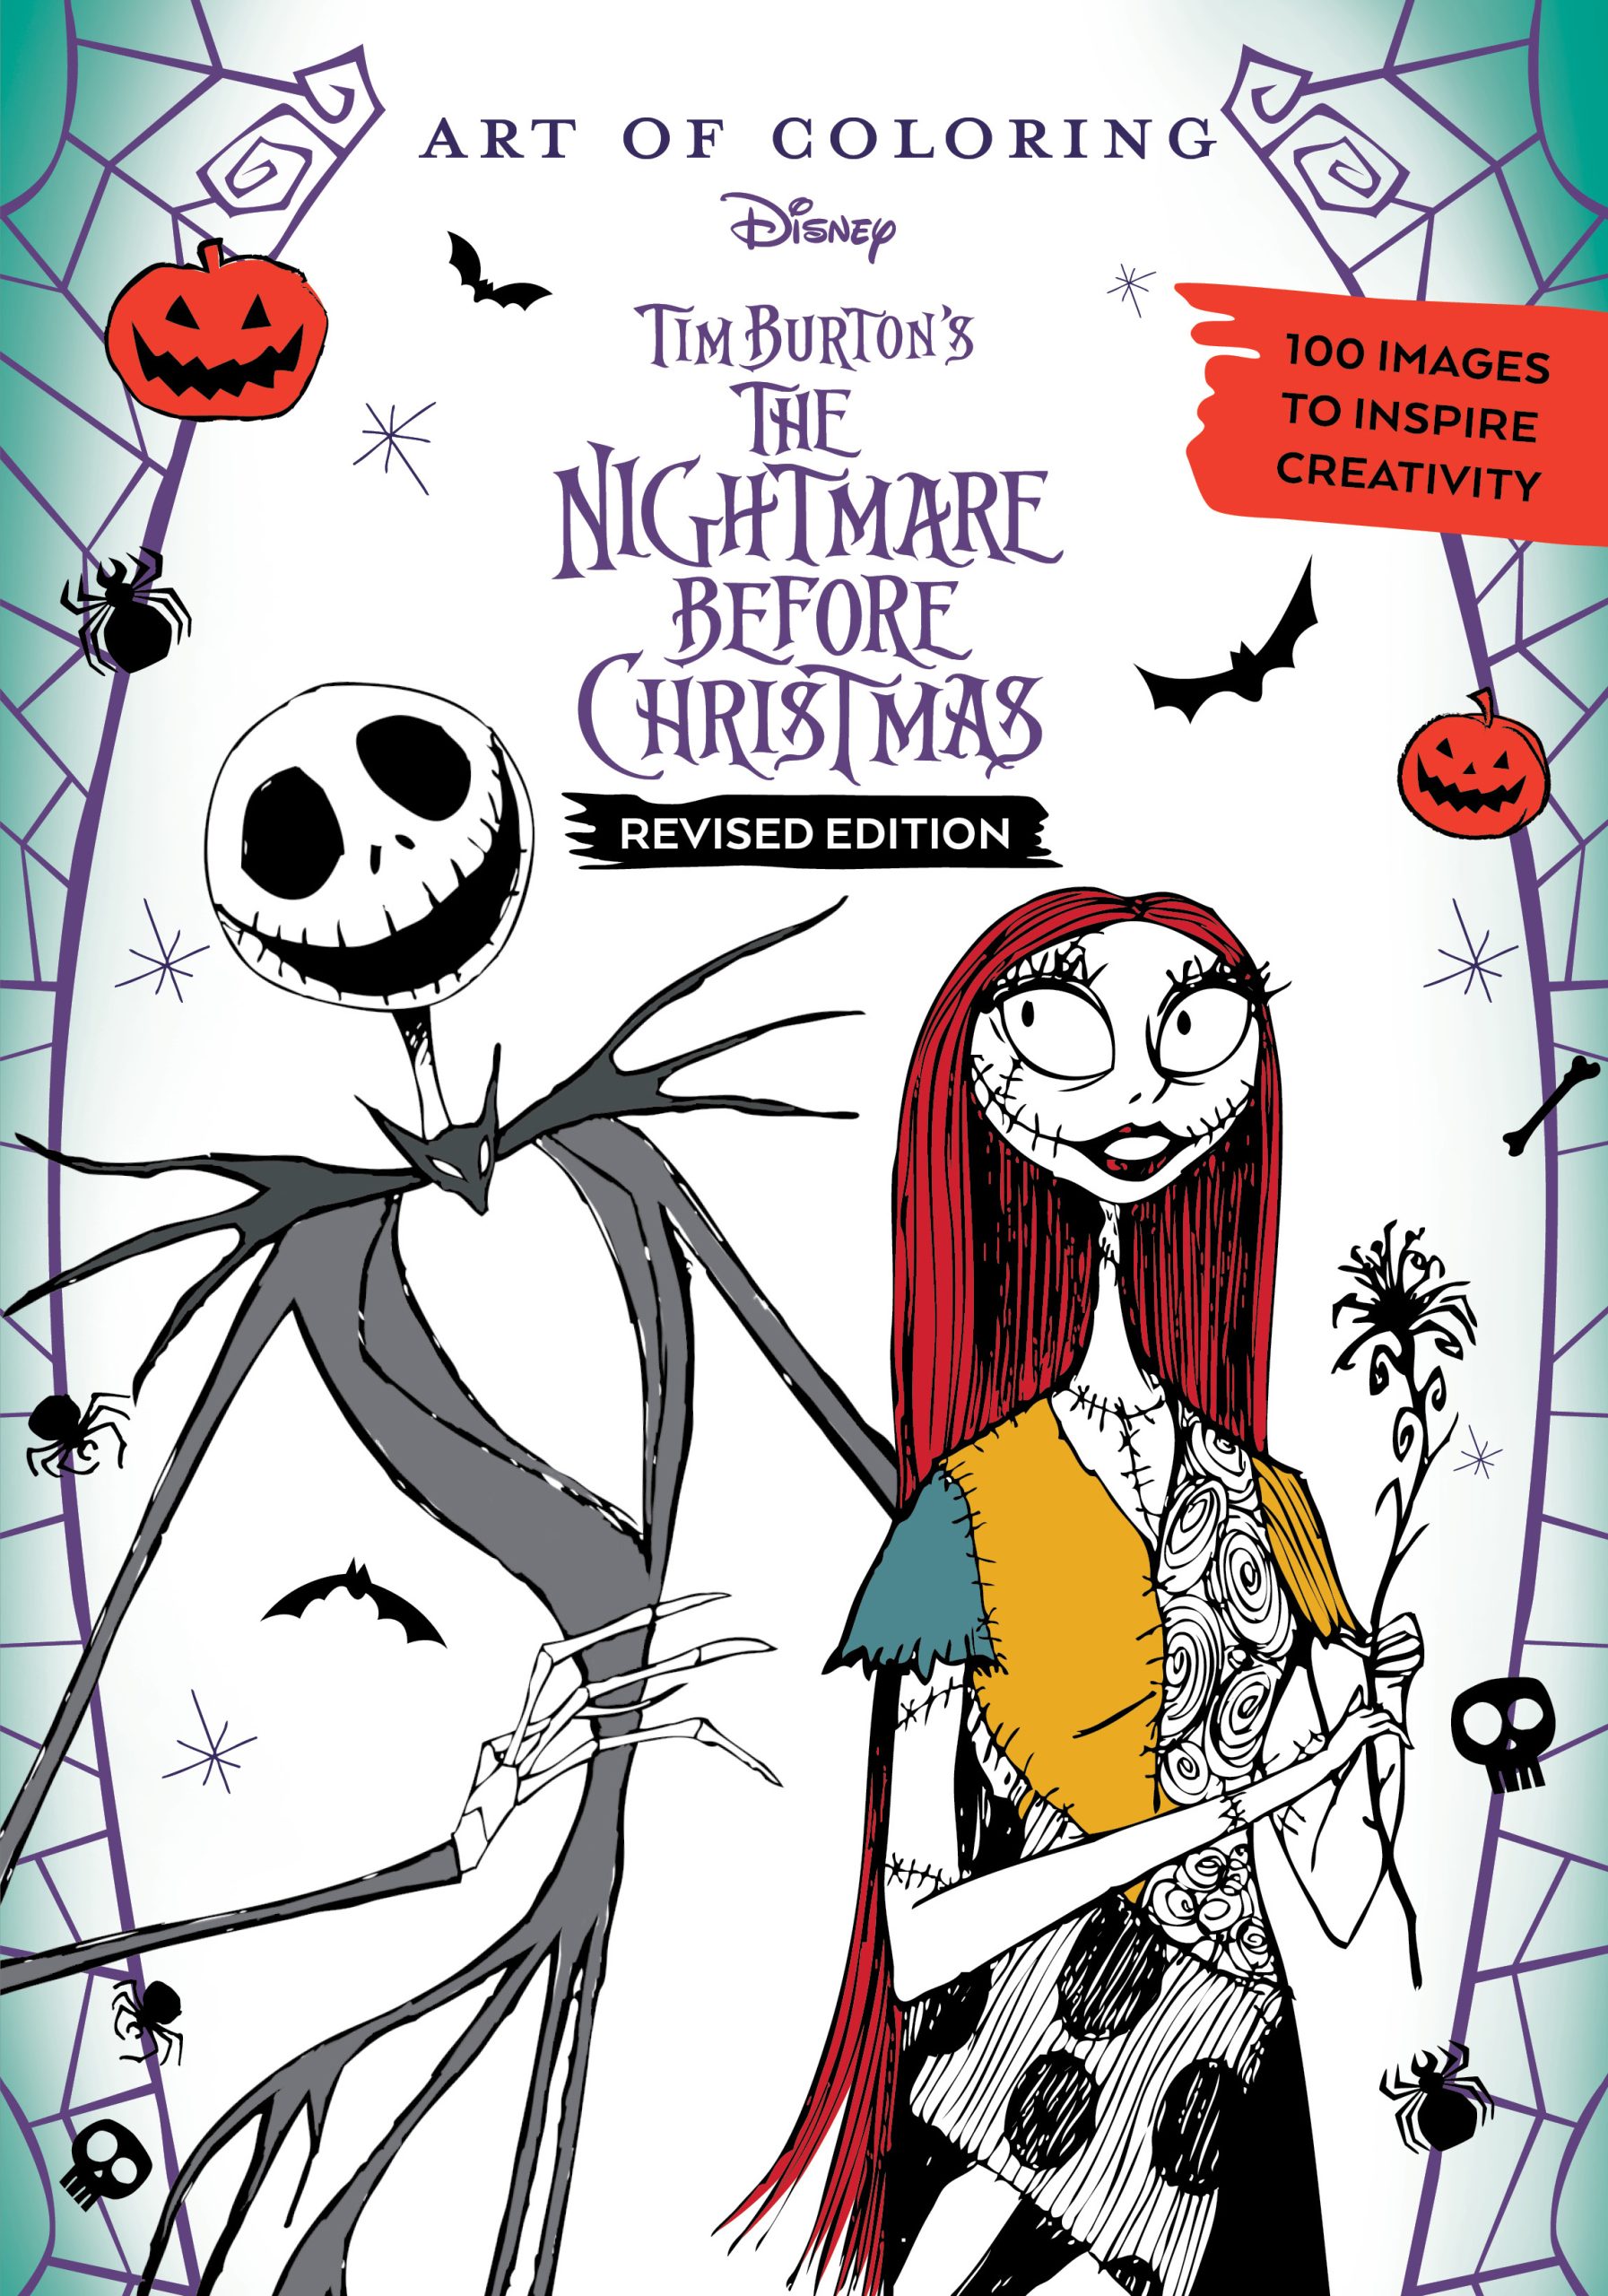 The Nightmare Before Christmas Knitting by Tanis Gray - The Nightmare  Before Christmas Books